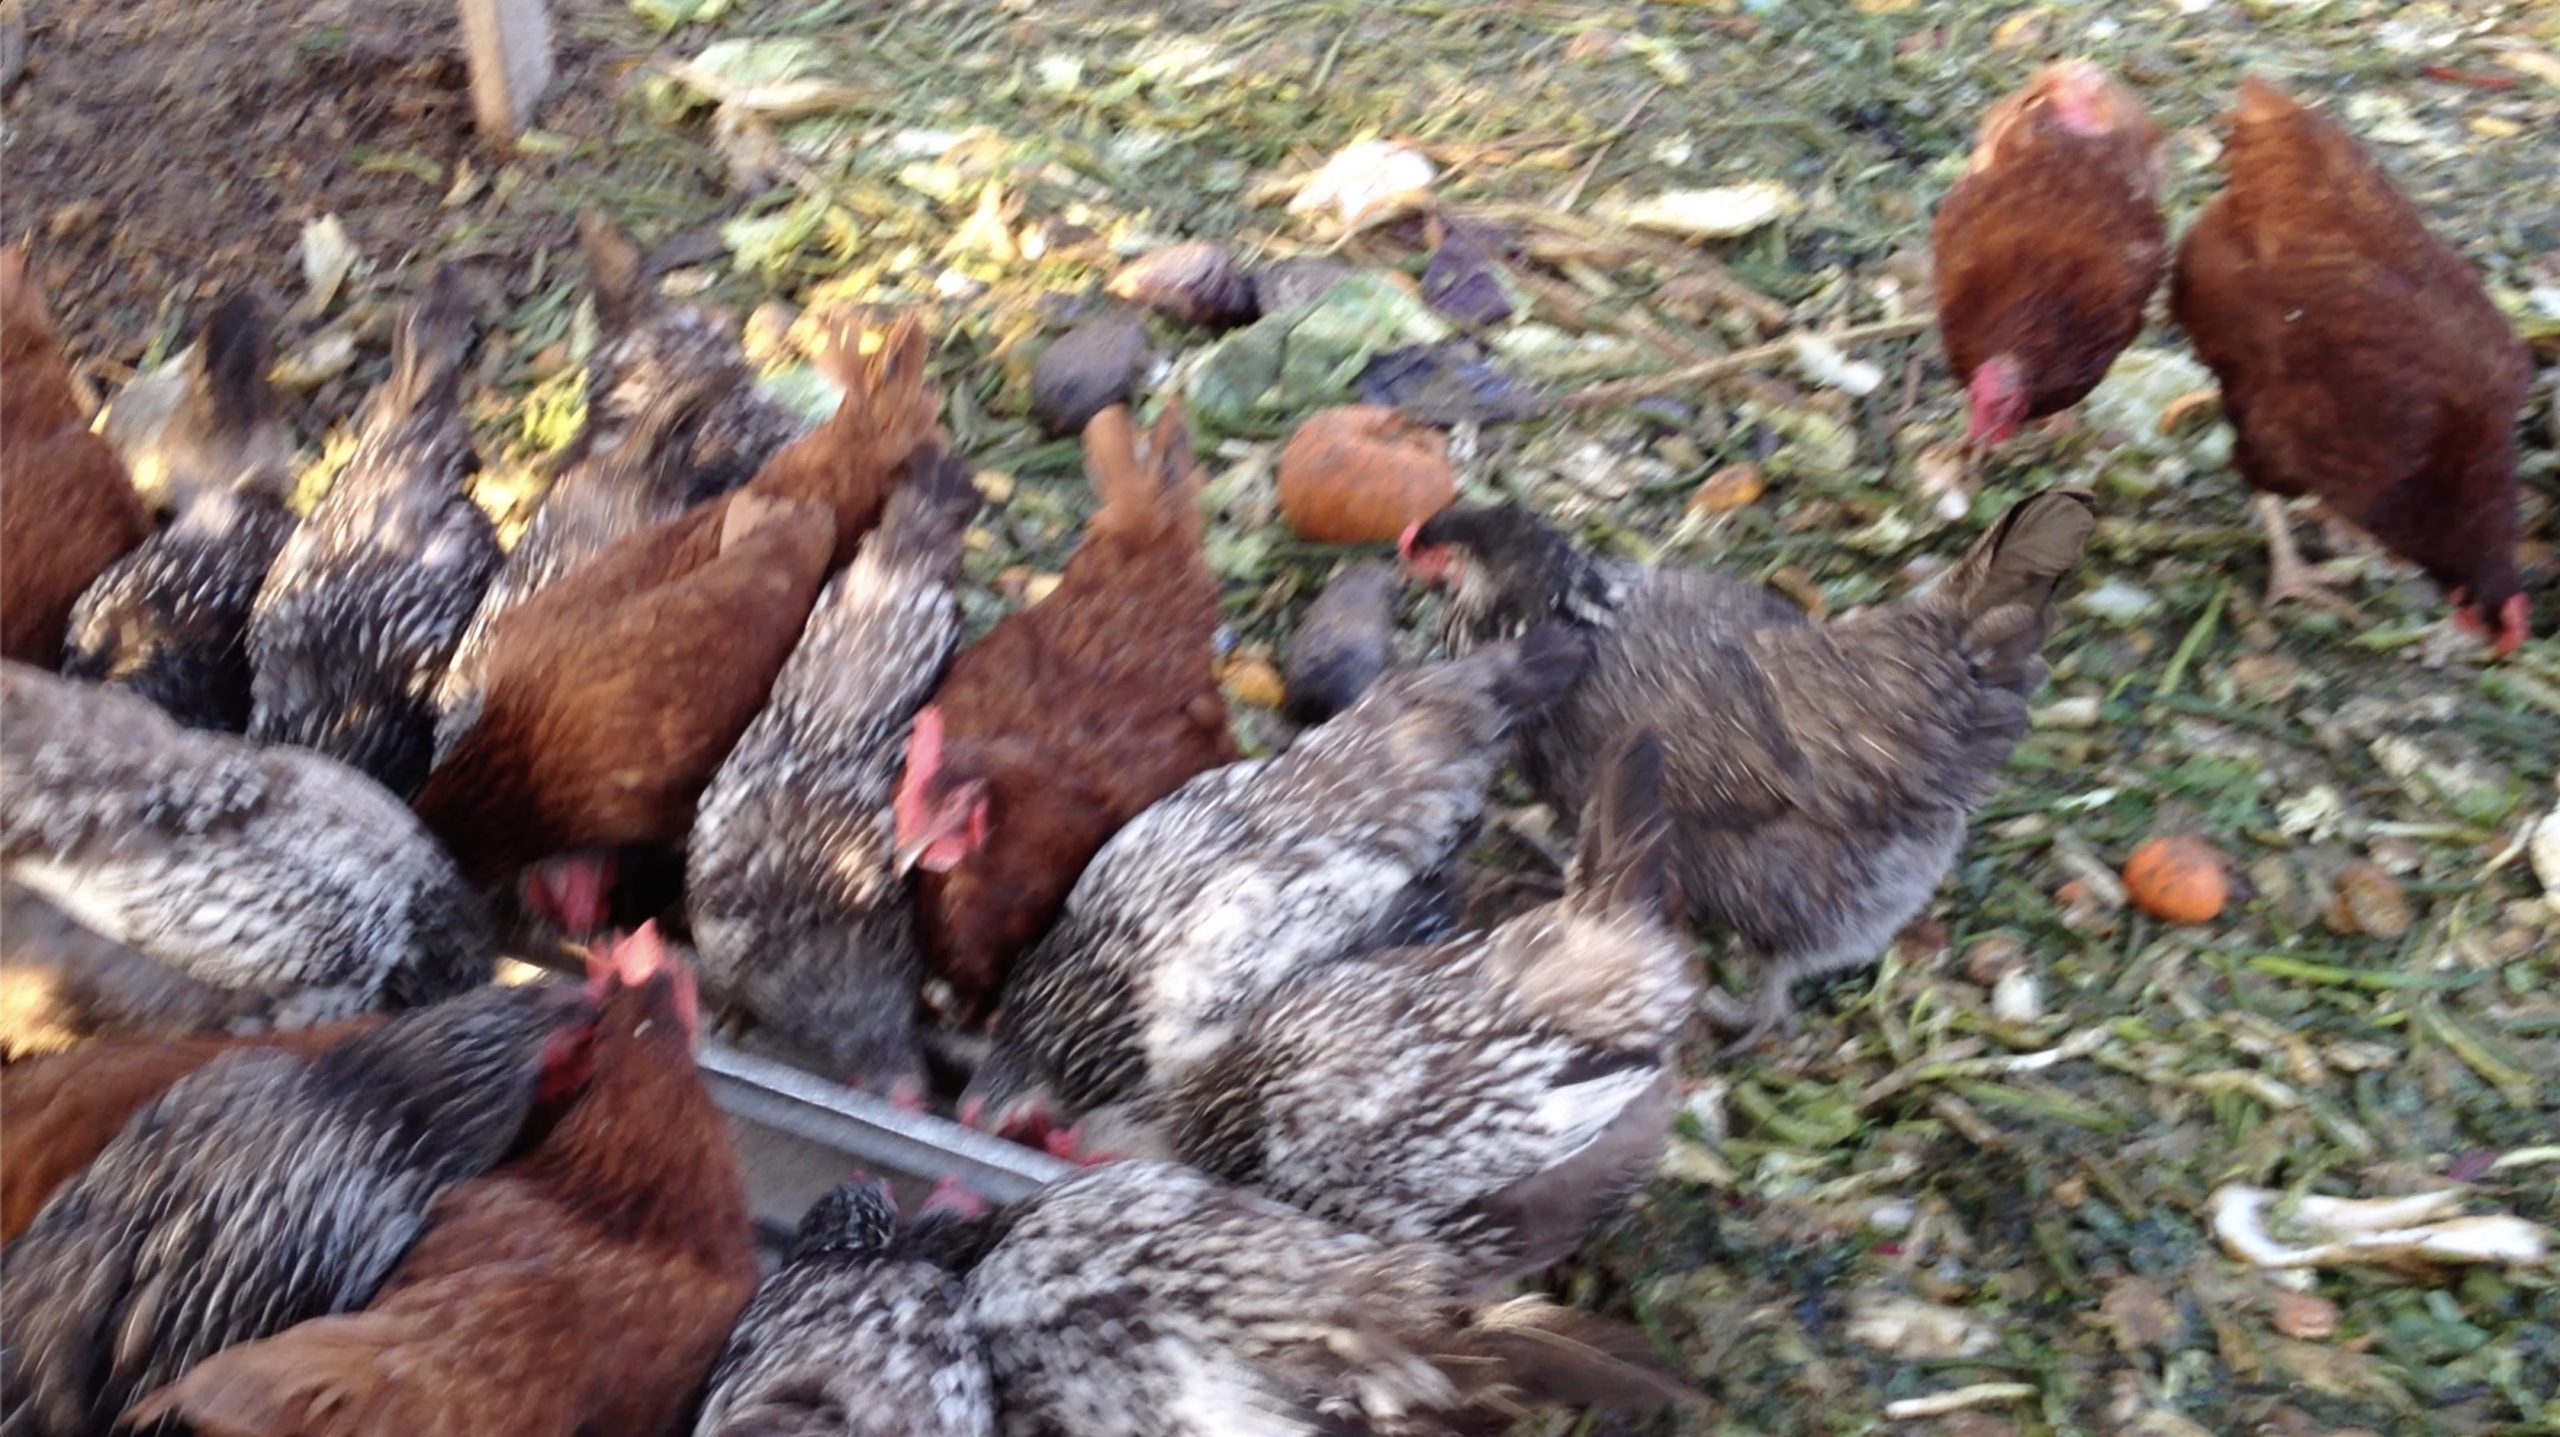 Compost Under the Chickens